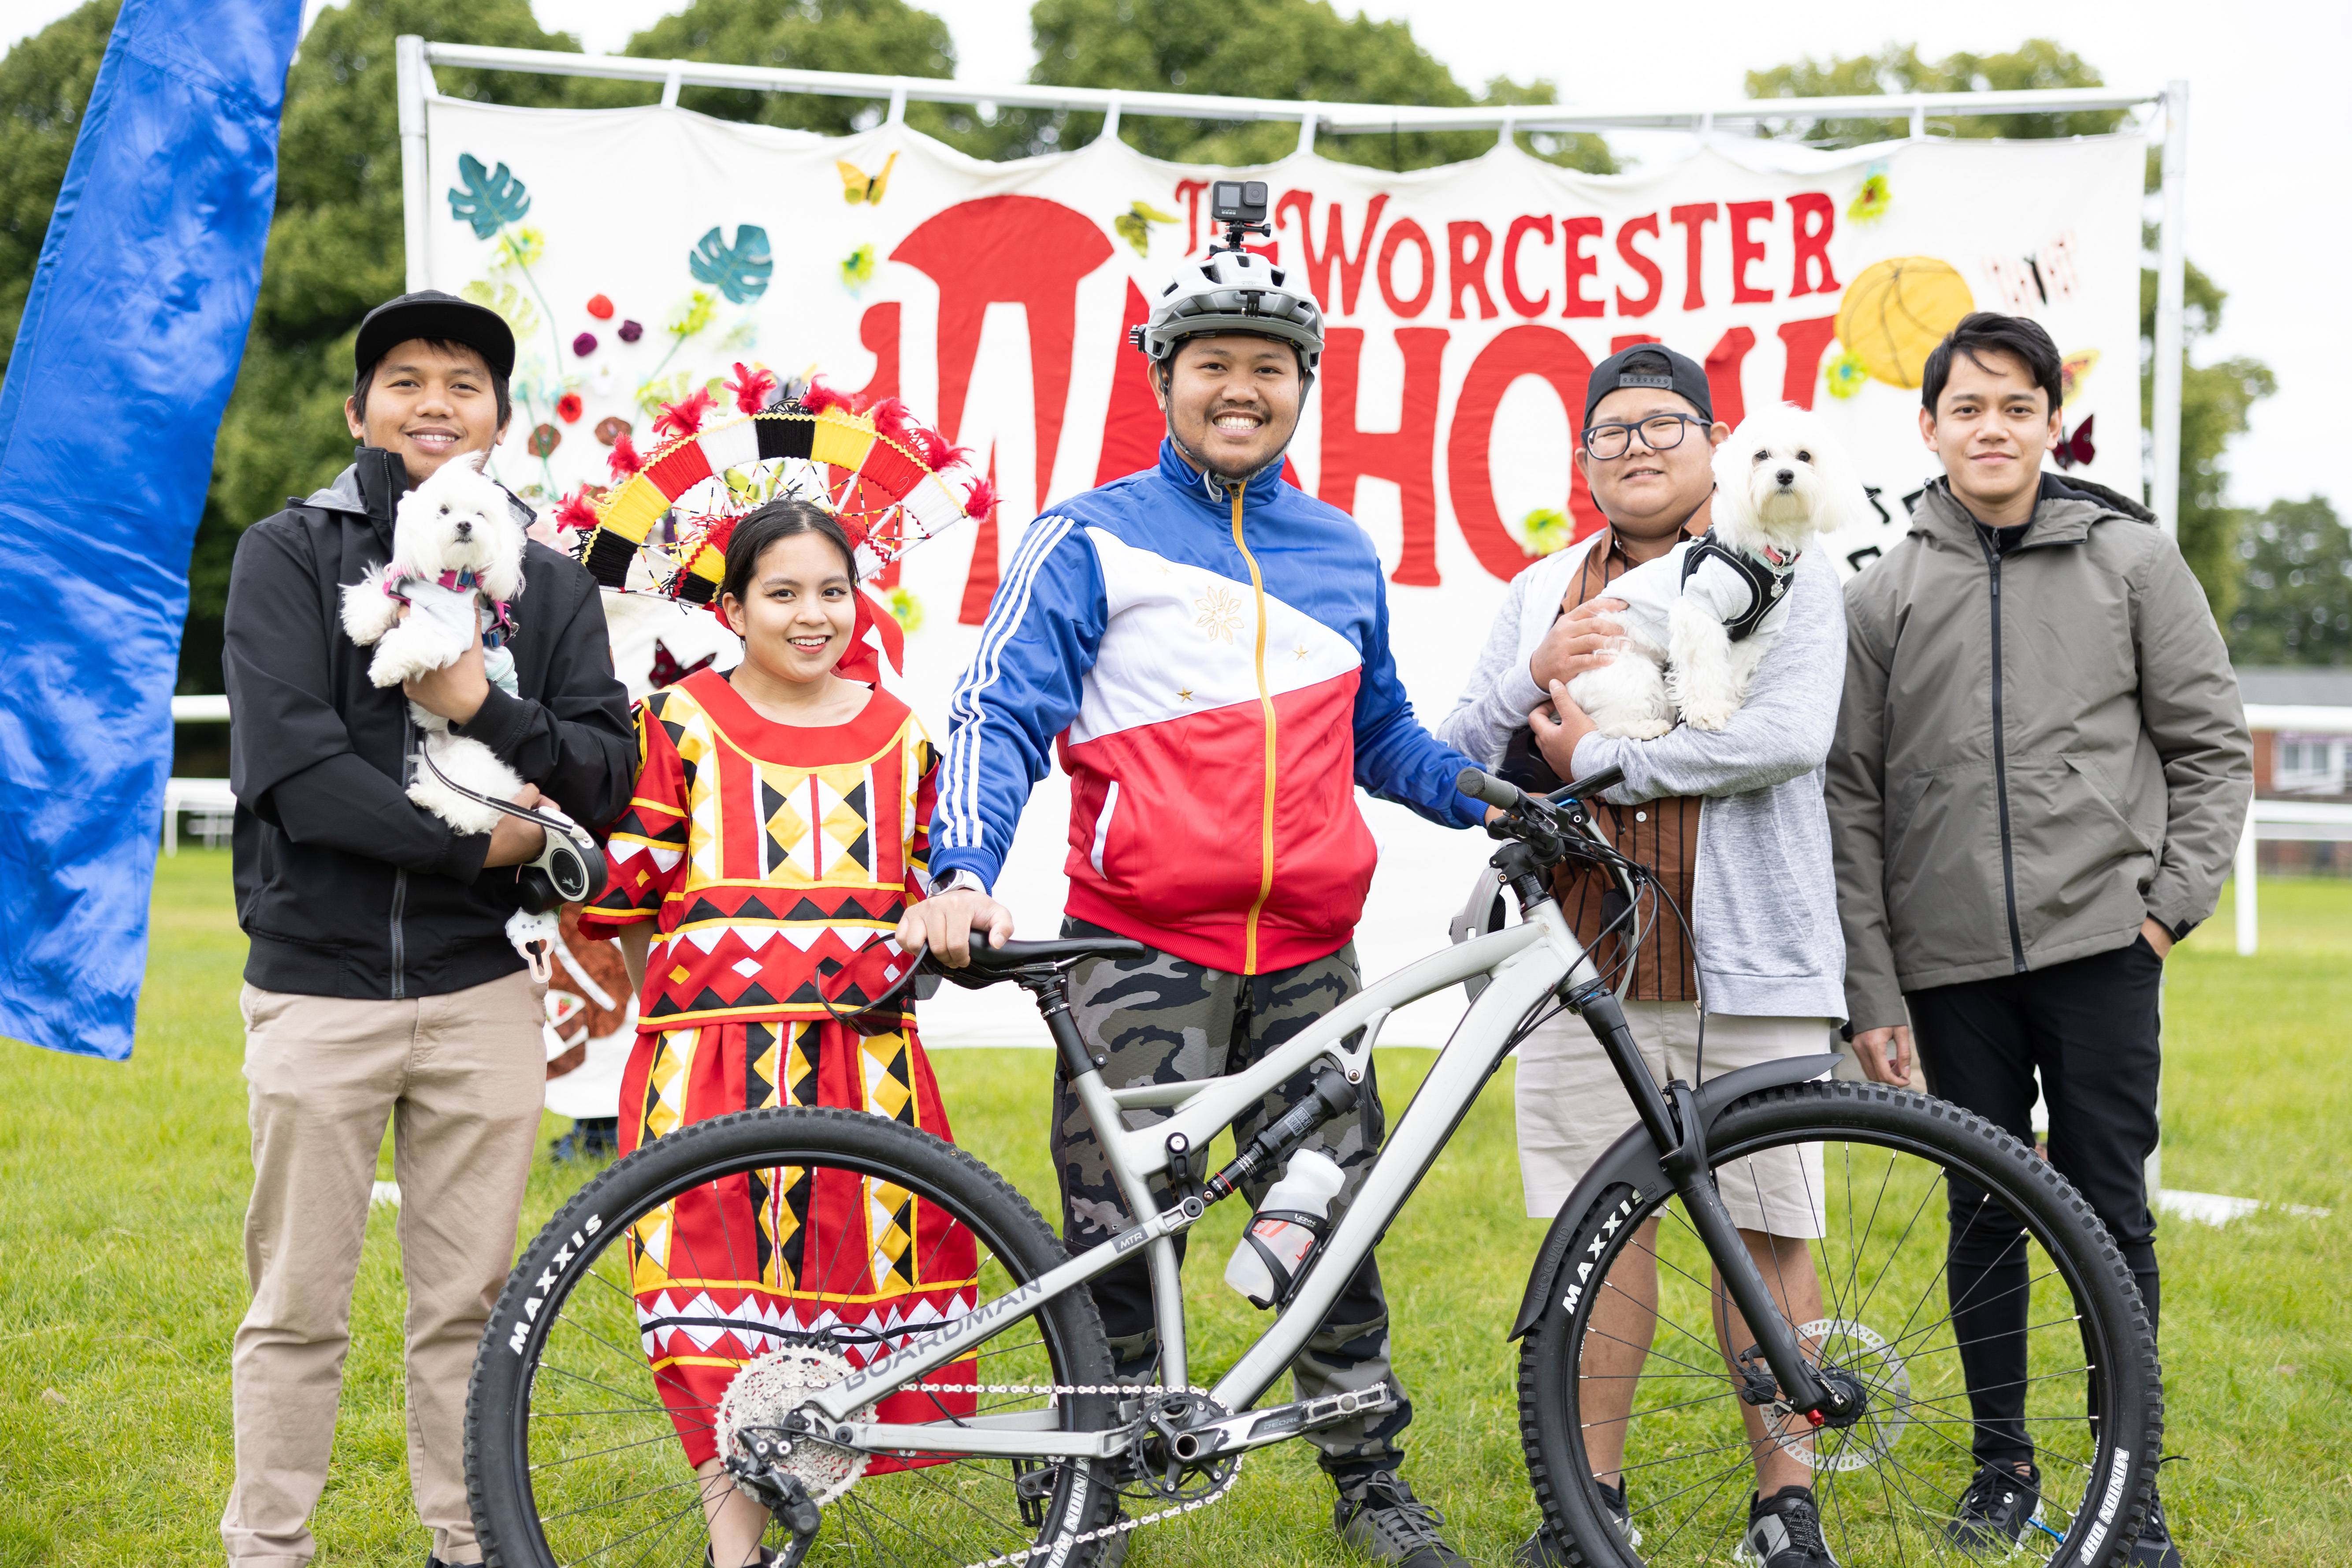 Members of the Worcester England Filipino Association in front of a Worcester Show banner